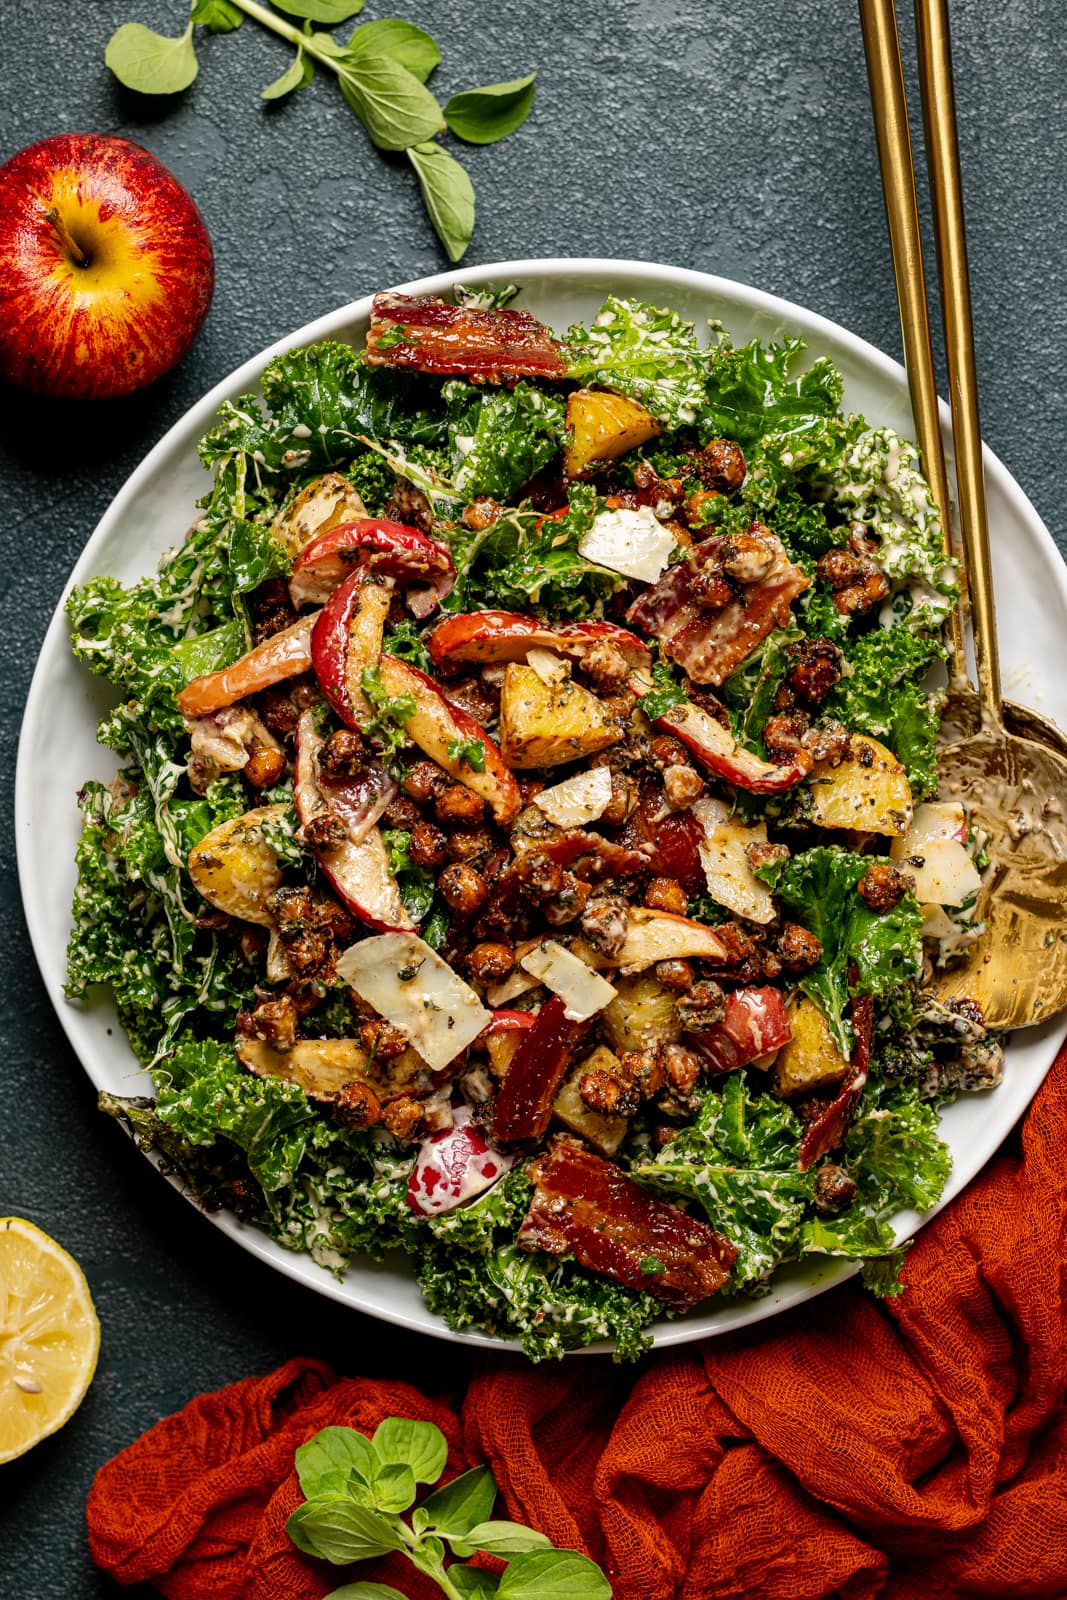 Full kale salad tossed in dressing with two gold serving spoons.